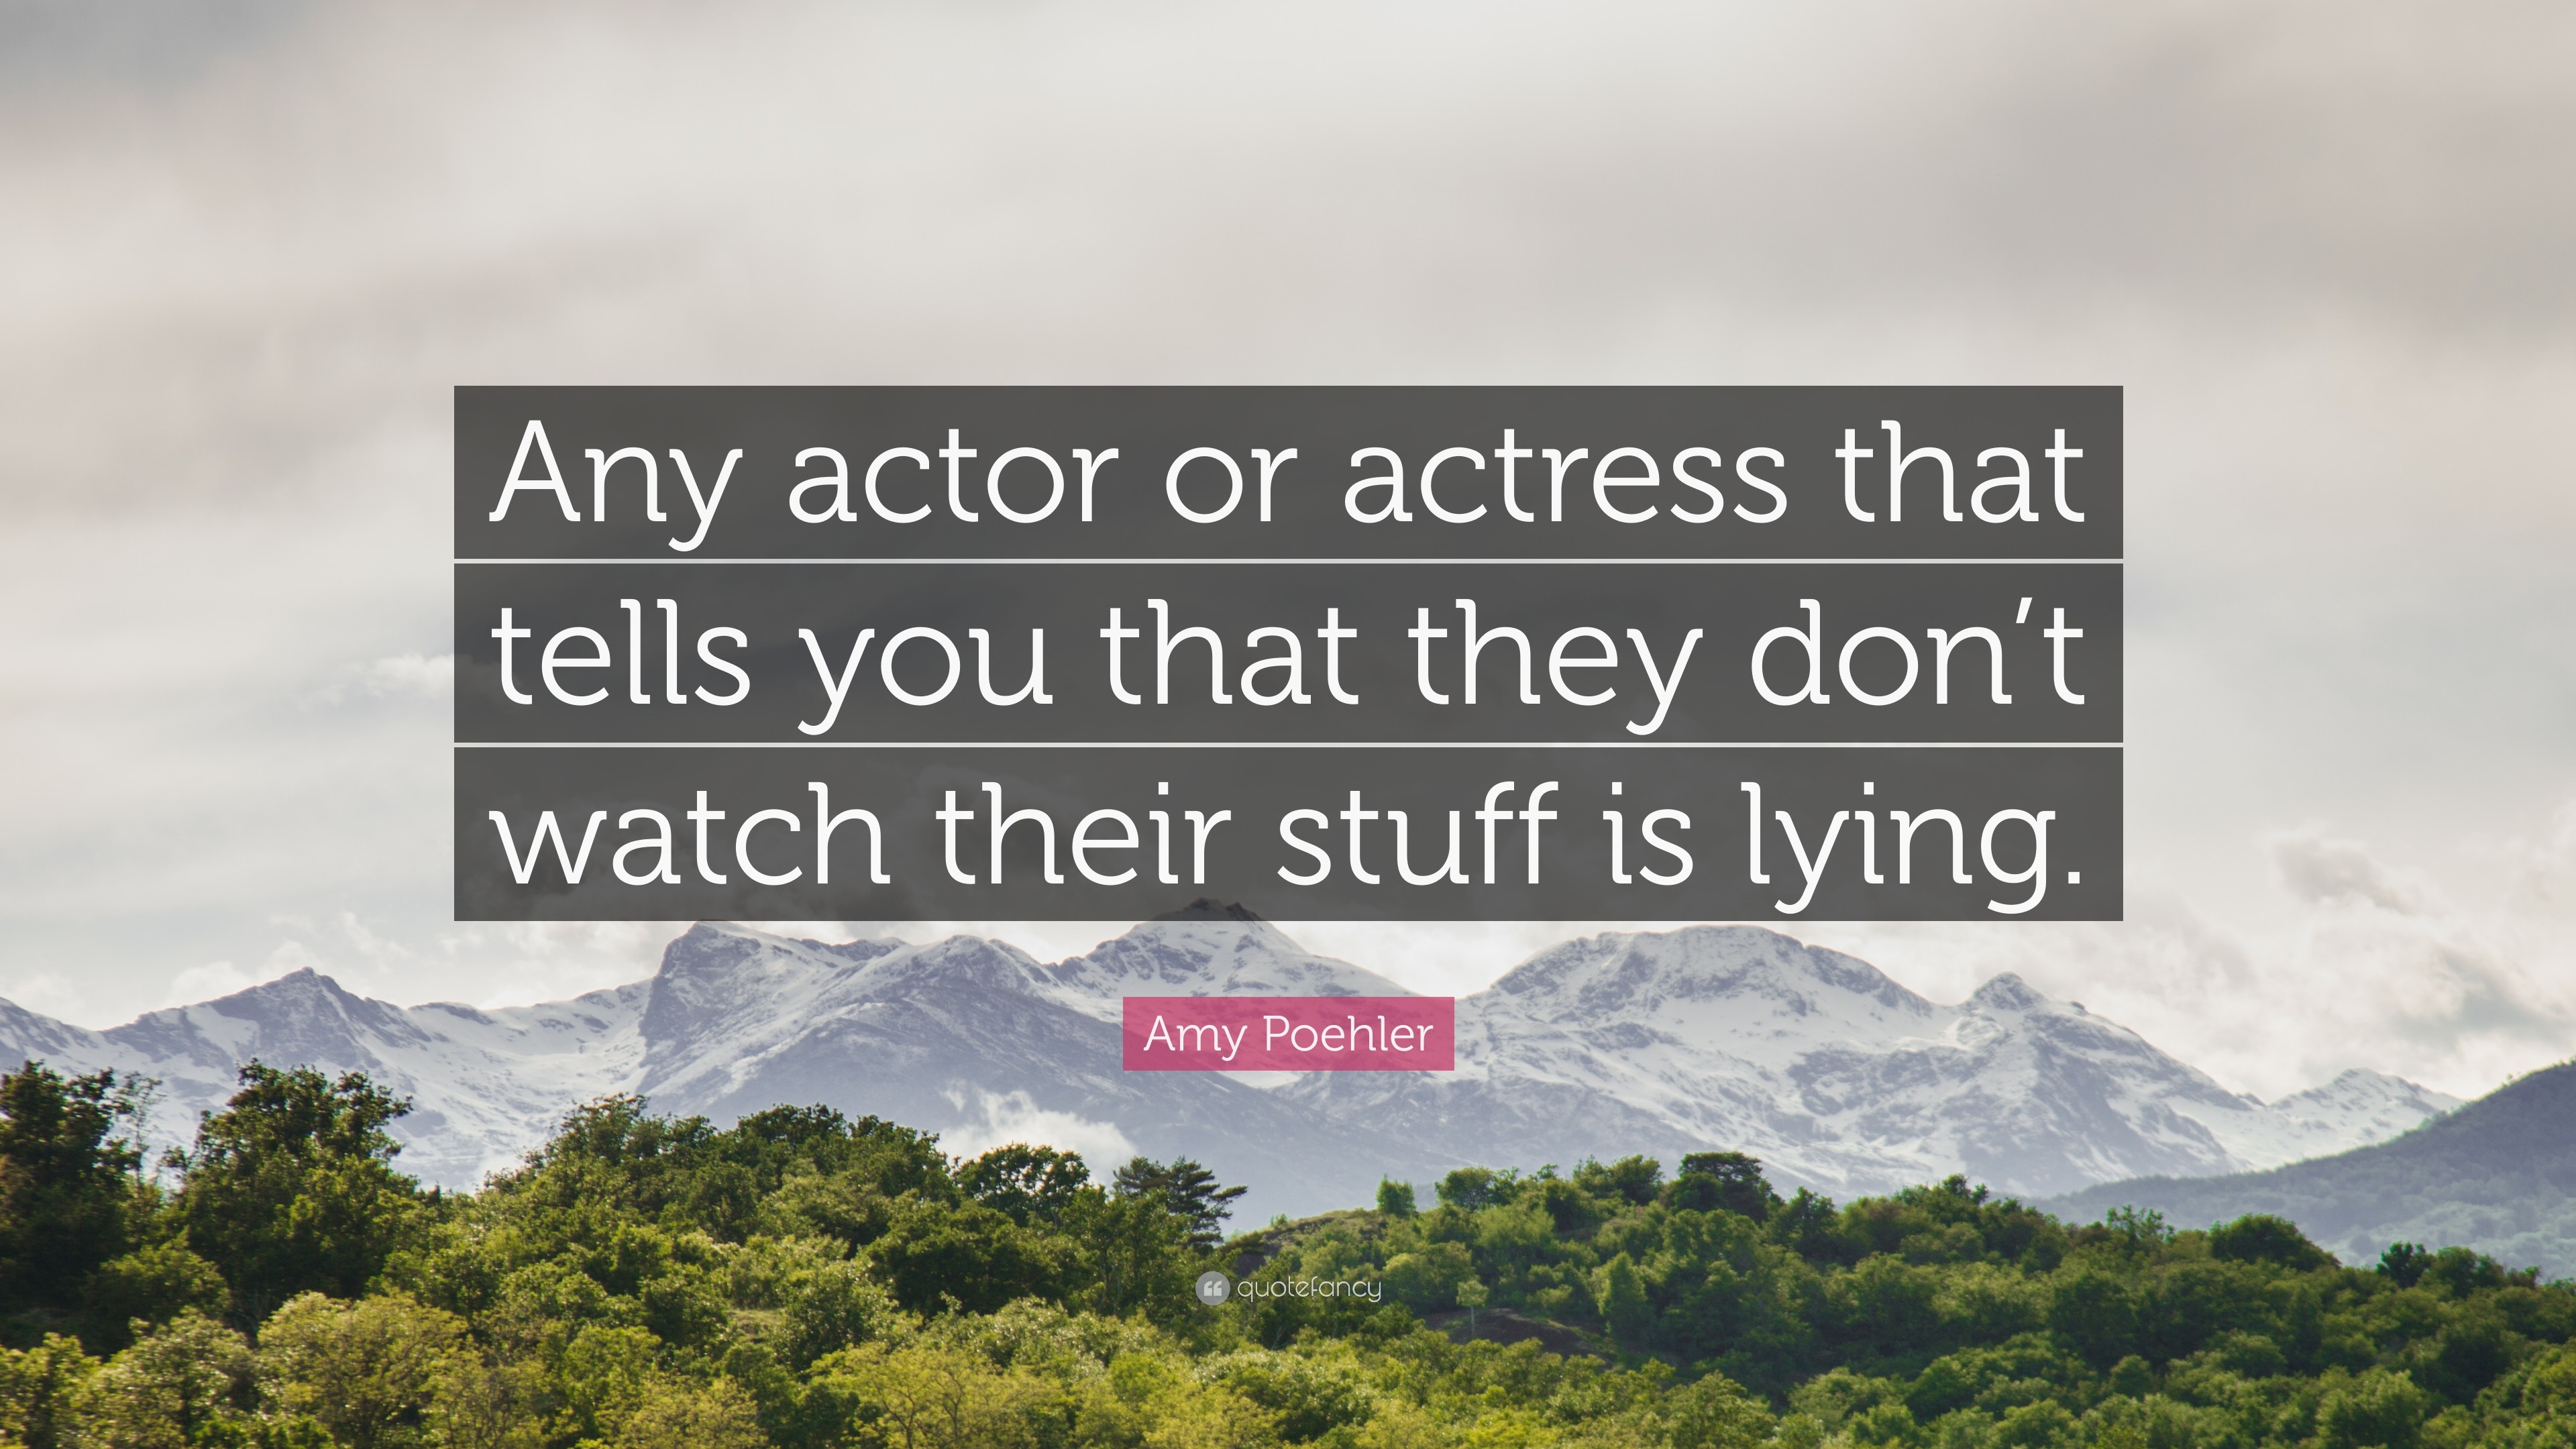 Amy Poehler Quote “any Actor Or Actress That Tells You That They Dont Watch Their Stuff Is Lying” 7894